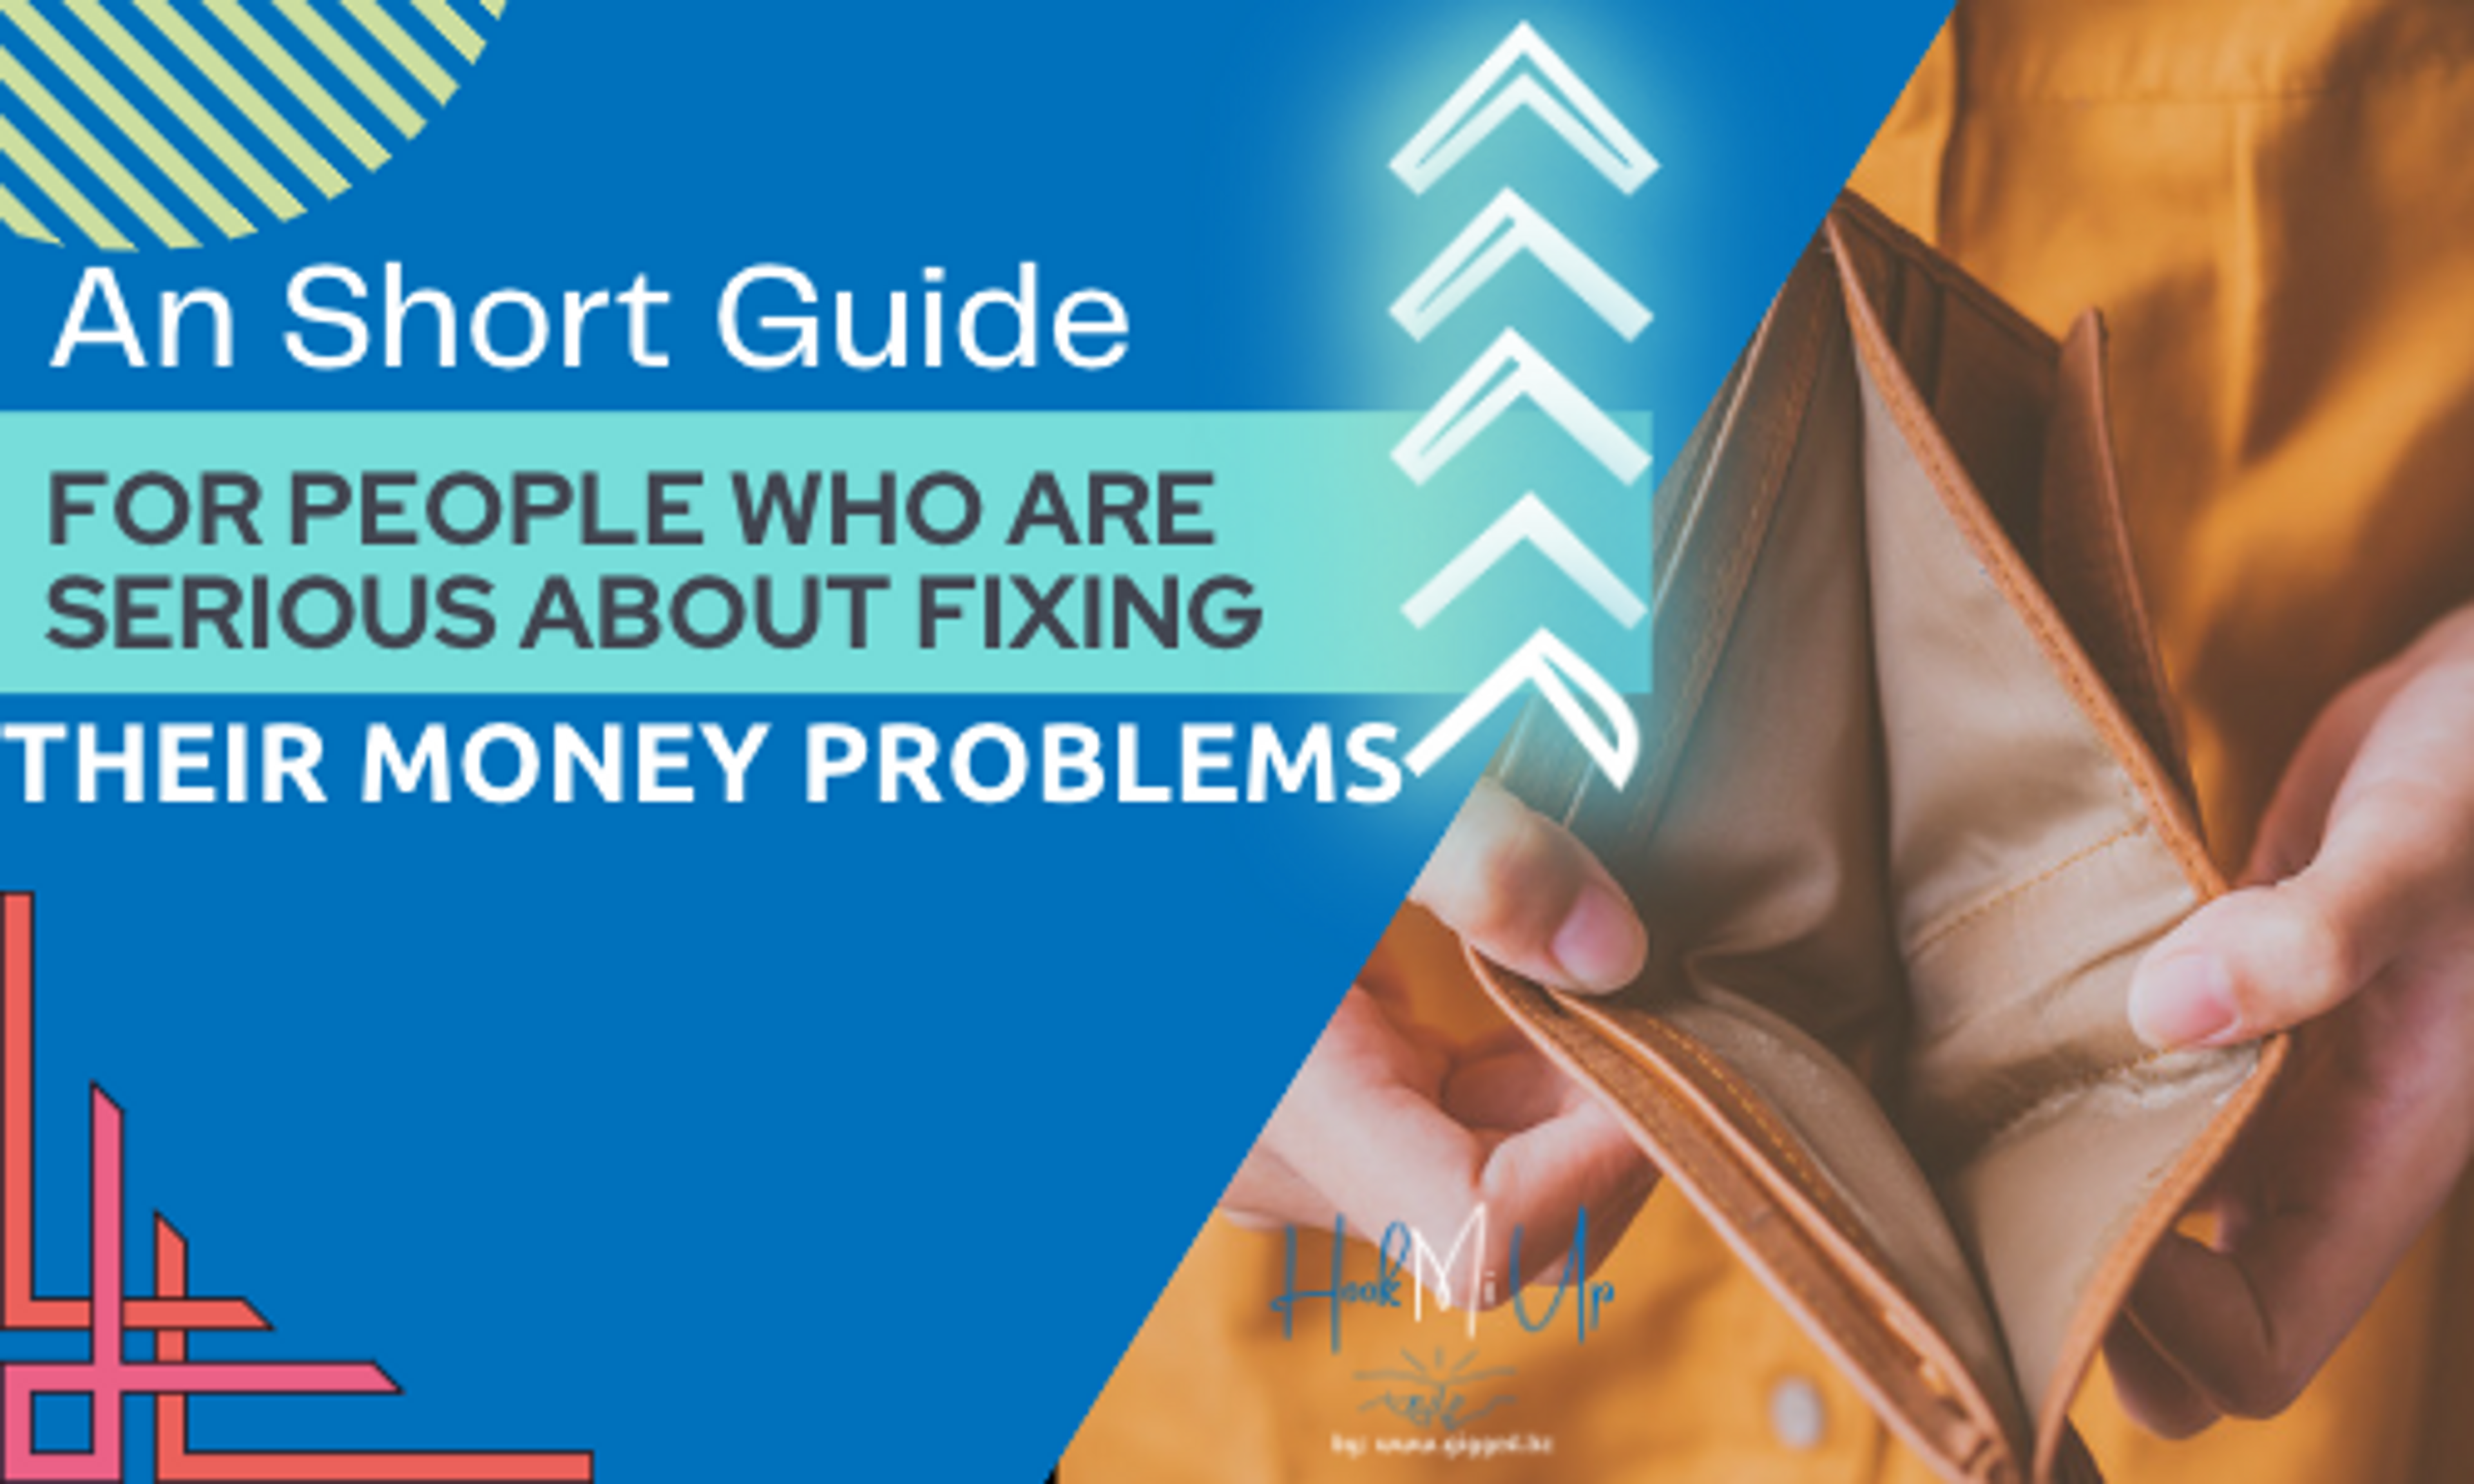 A guide for people who are serious about fixing their money problems